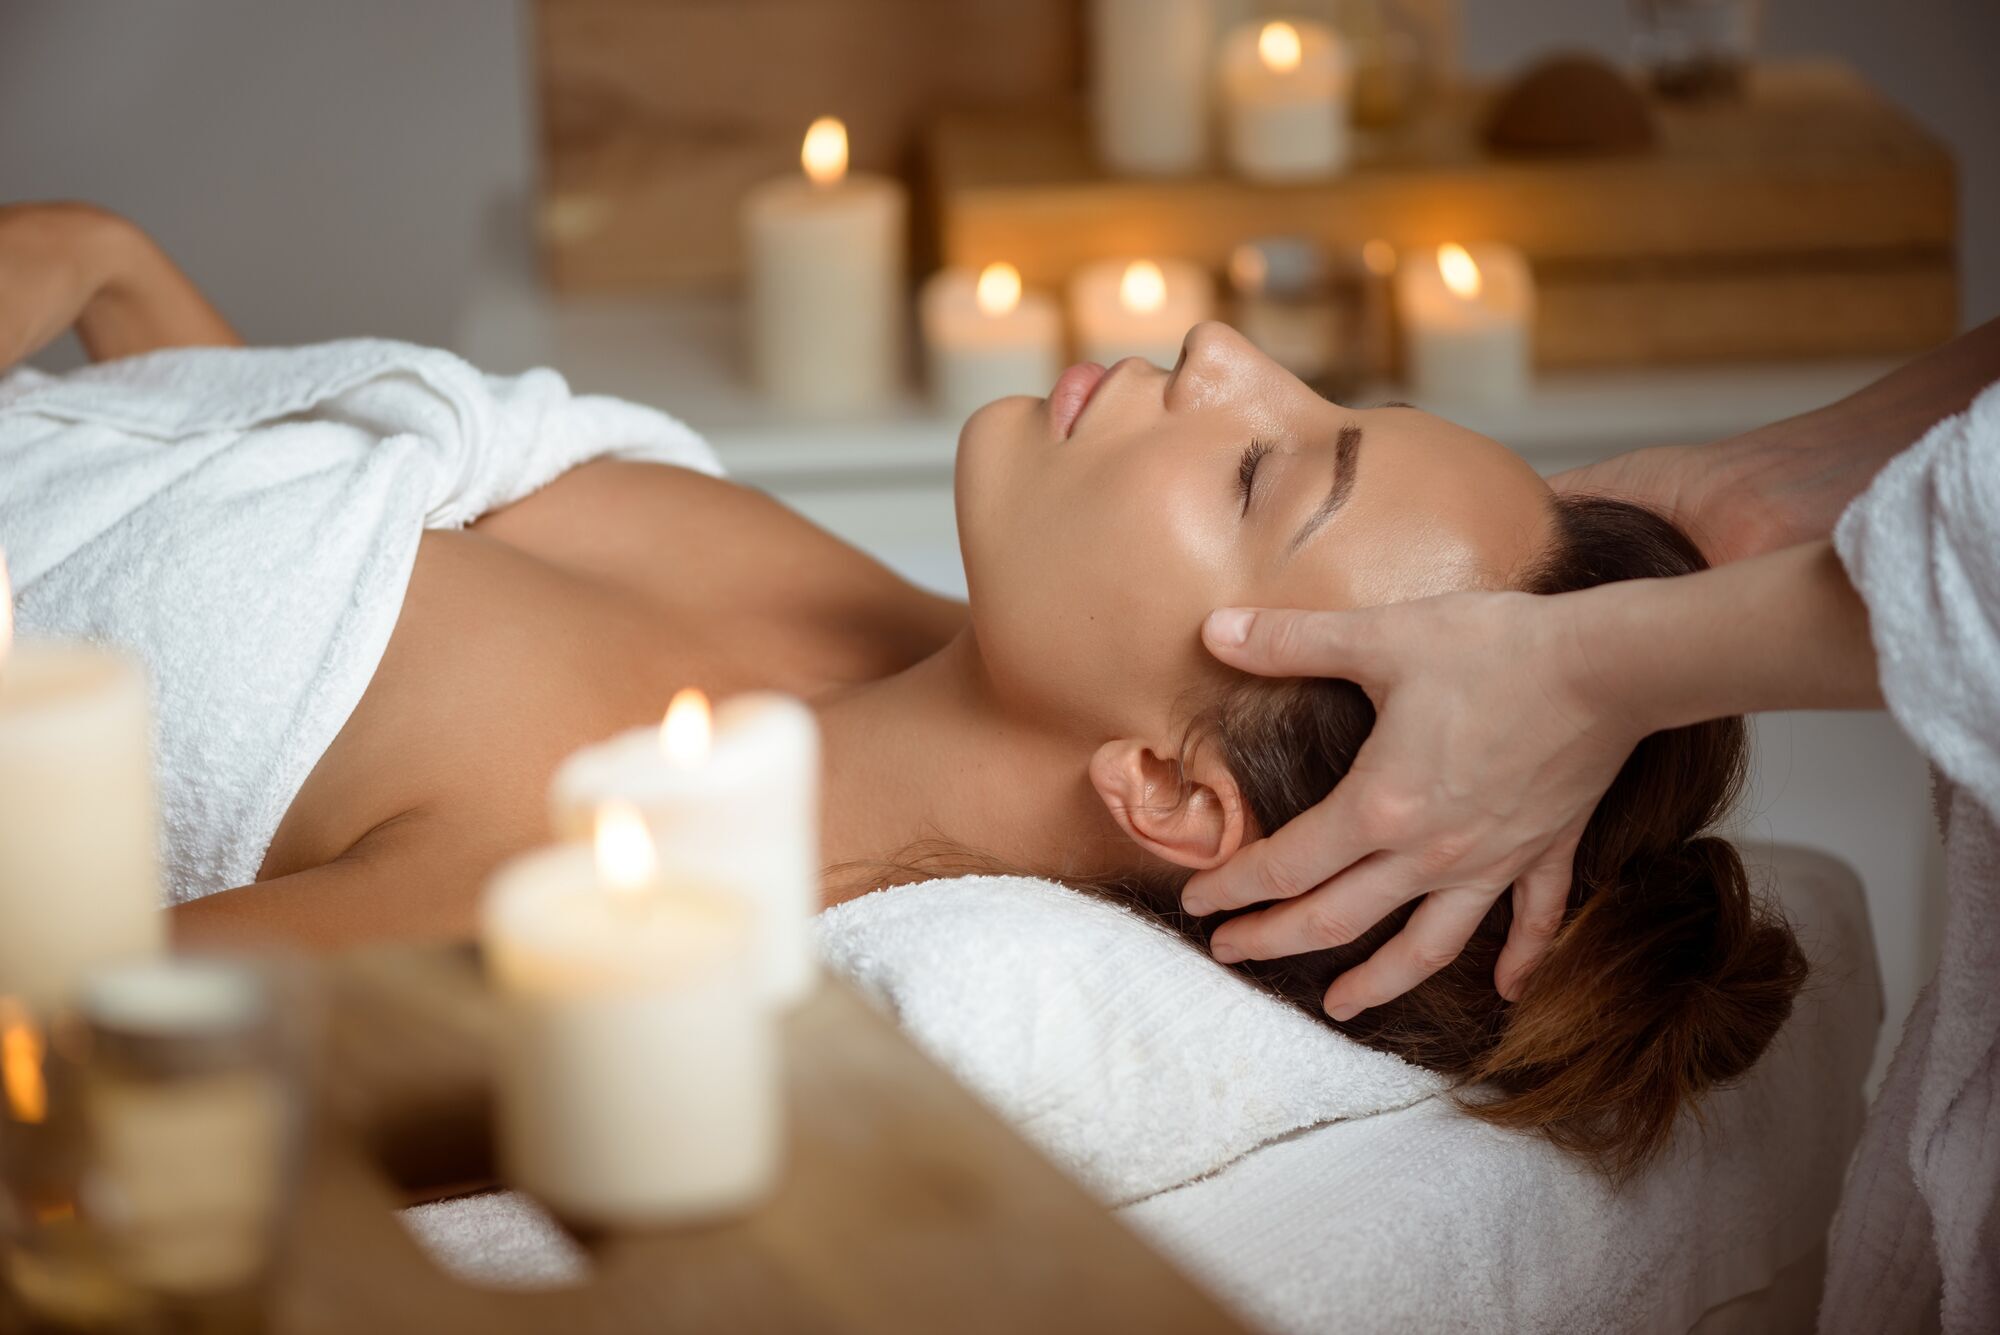 Top 9 NYC spa hotels for discovering true happiness and harmonizing emotions